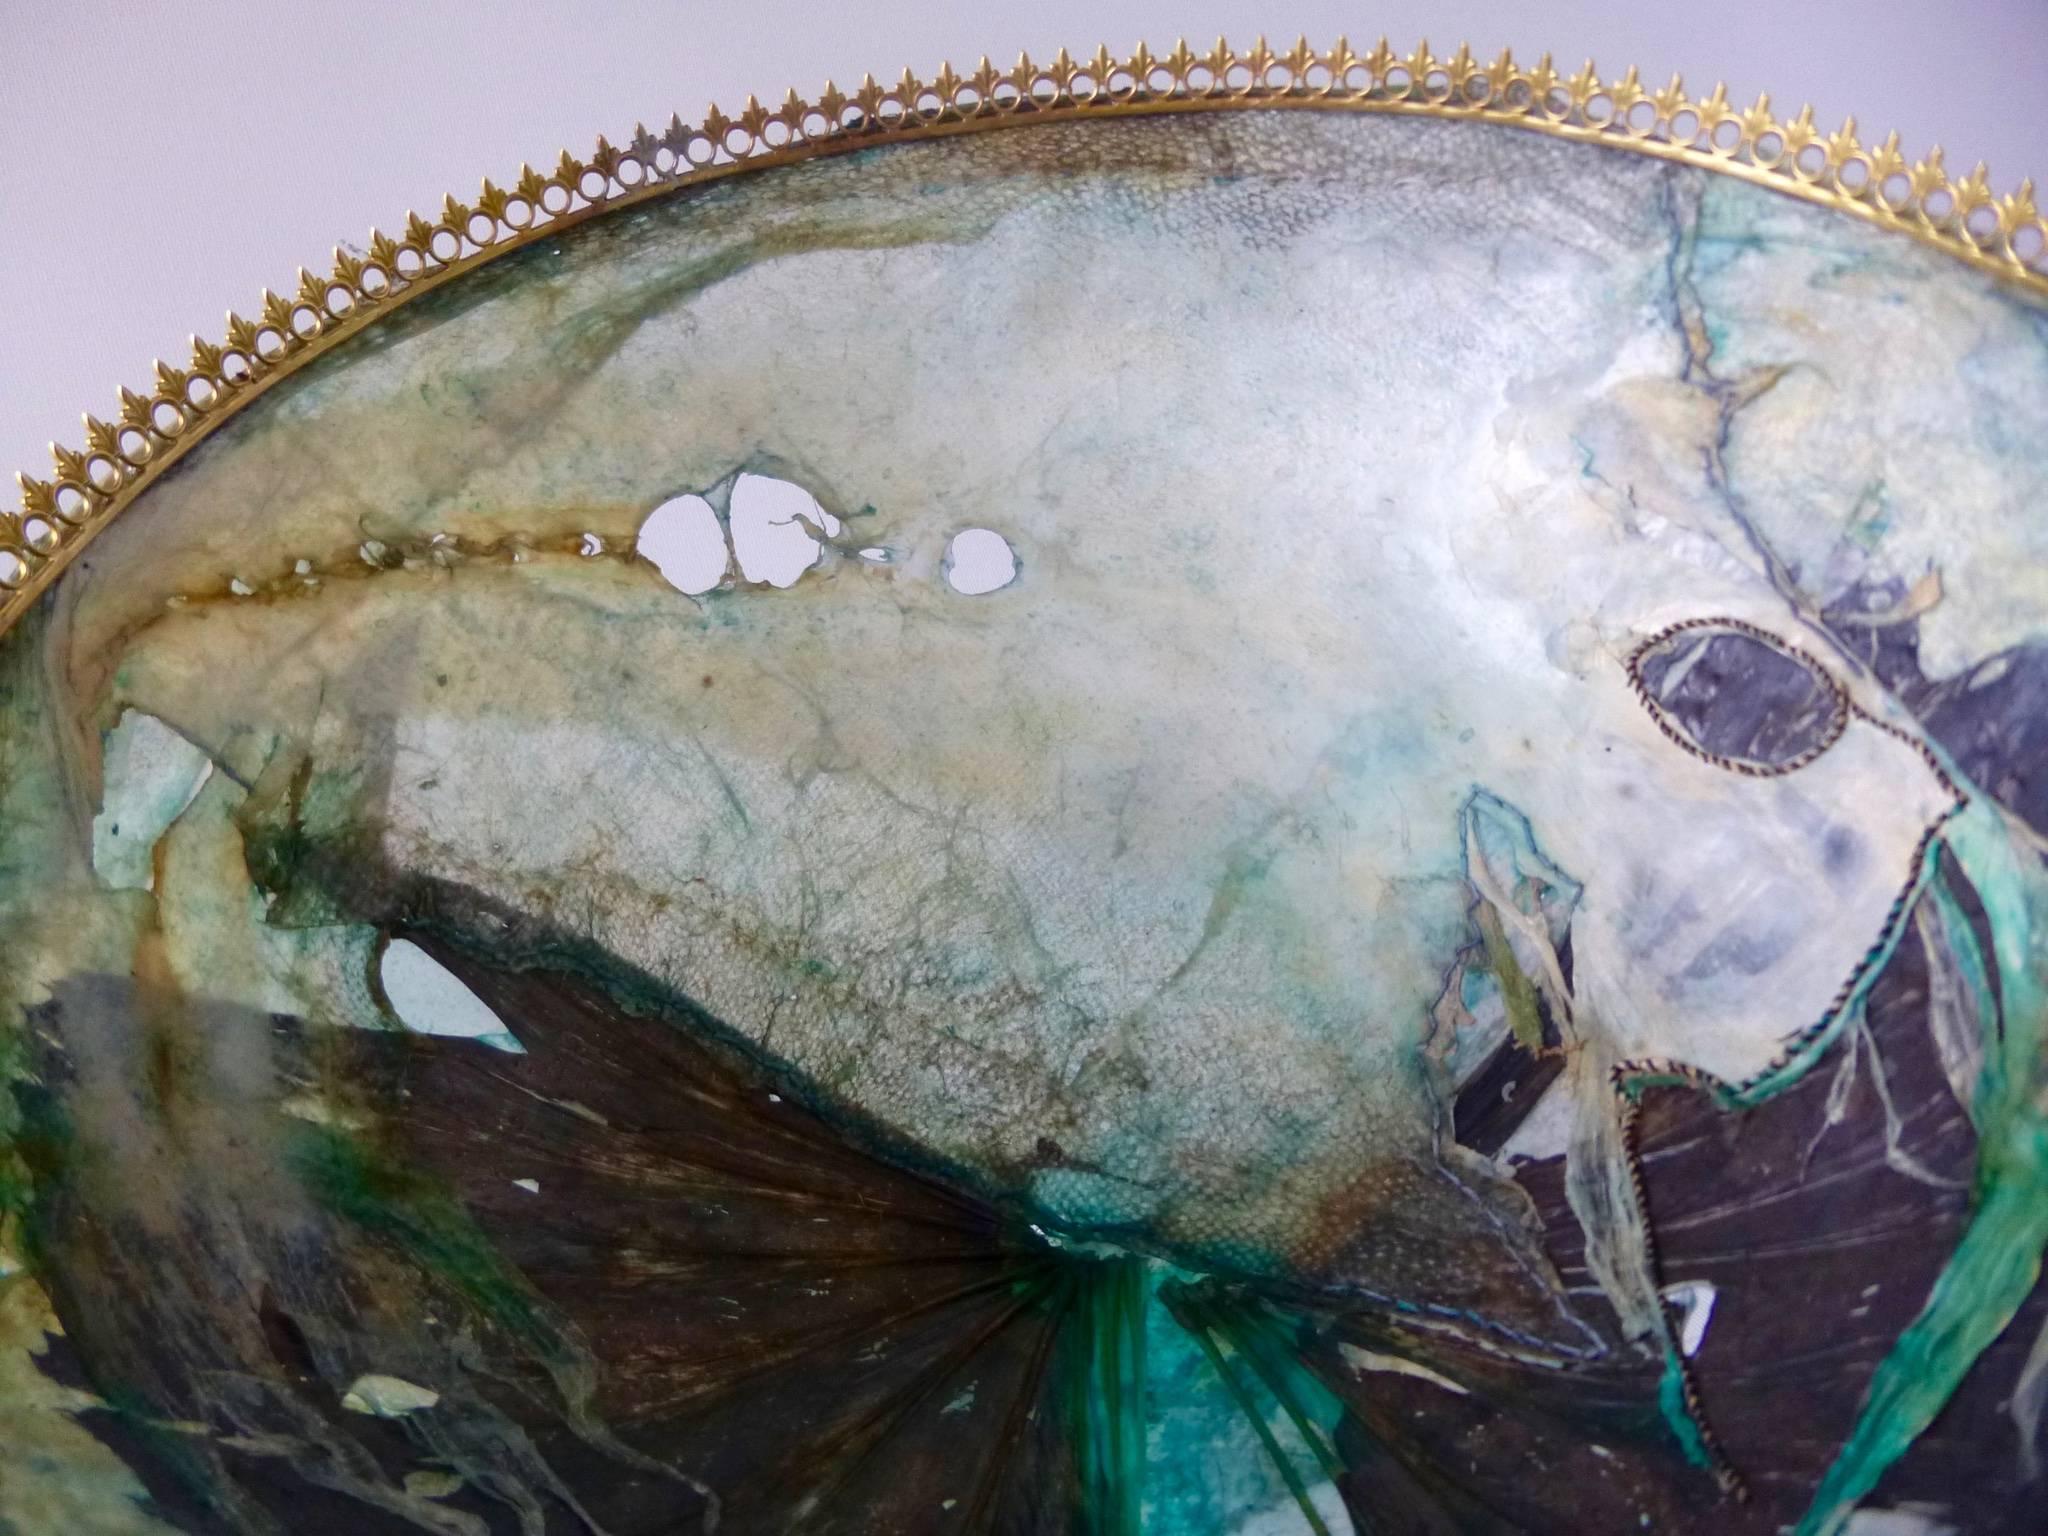 Exhibited at public gallery Saatchi London, February 2018 as part of the Transfiguration Exhibition.
The bowl is mounted on a brass ring stand to allow light to pass through the leather giving it an ethereal and ancient quality. The colour in fish